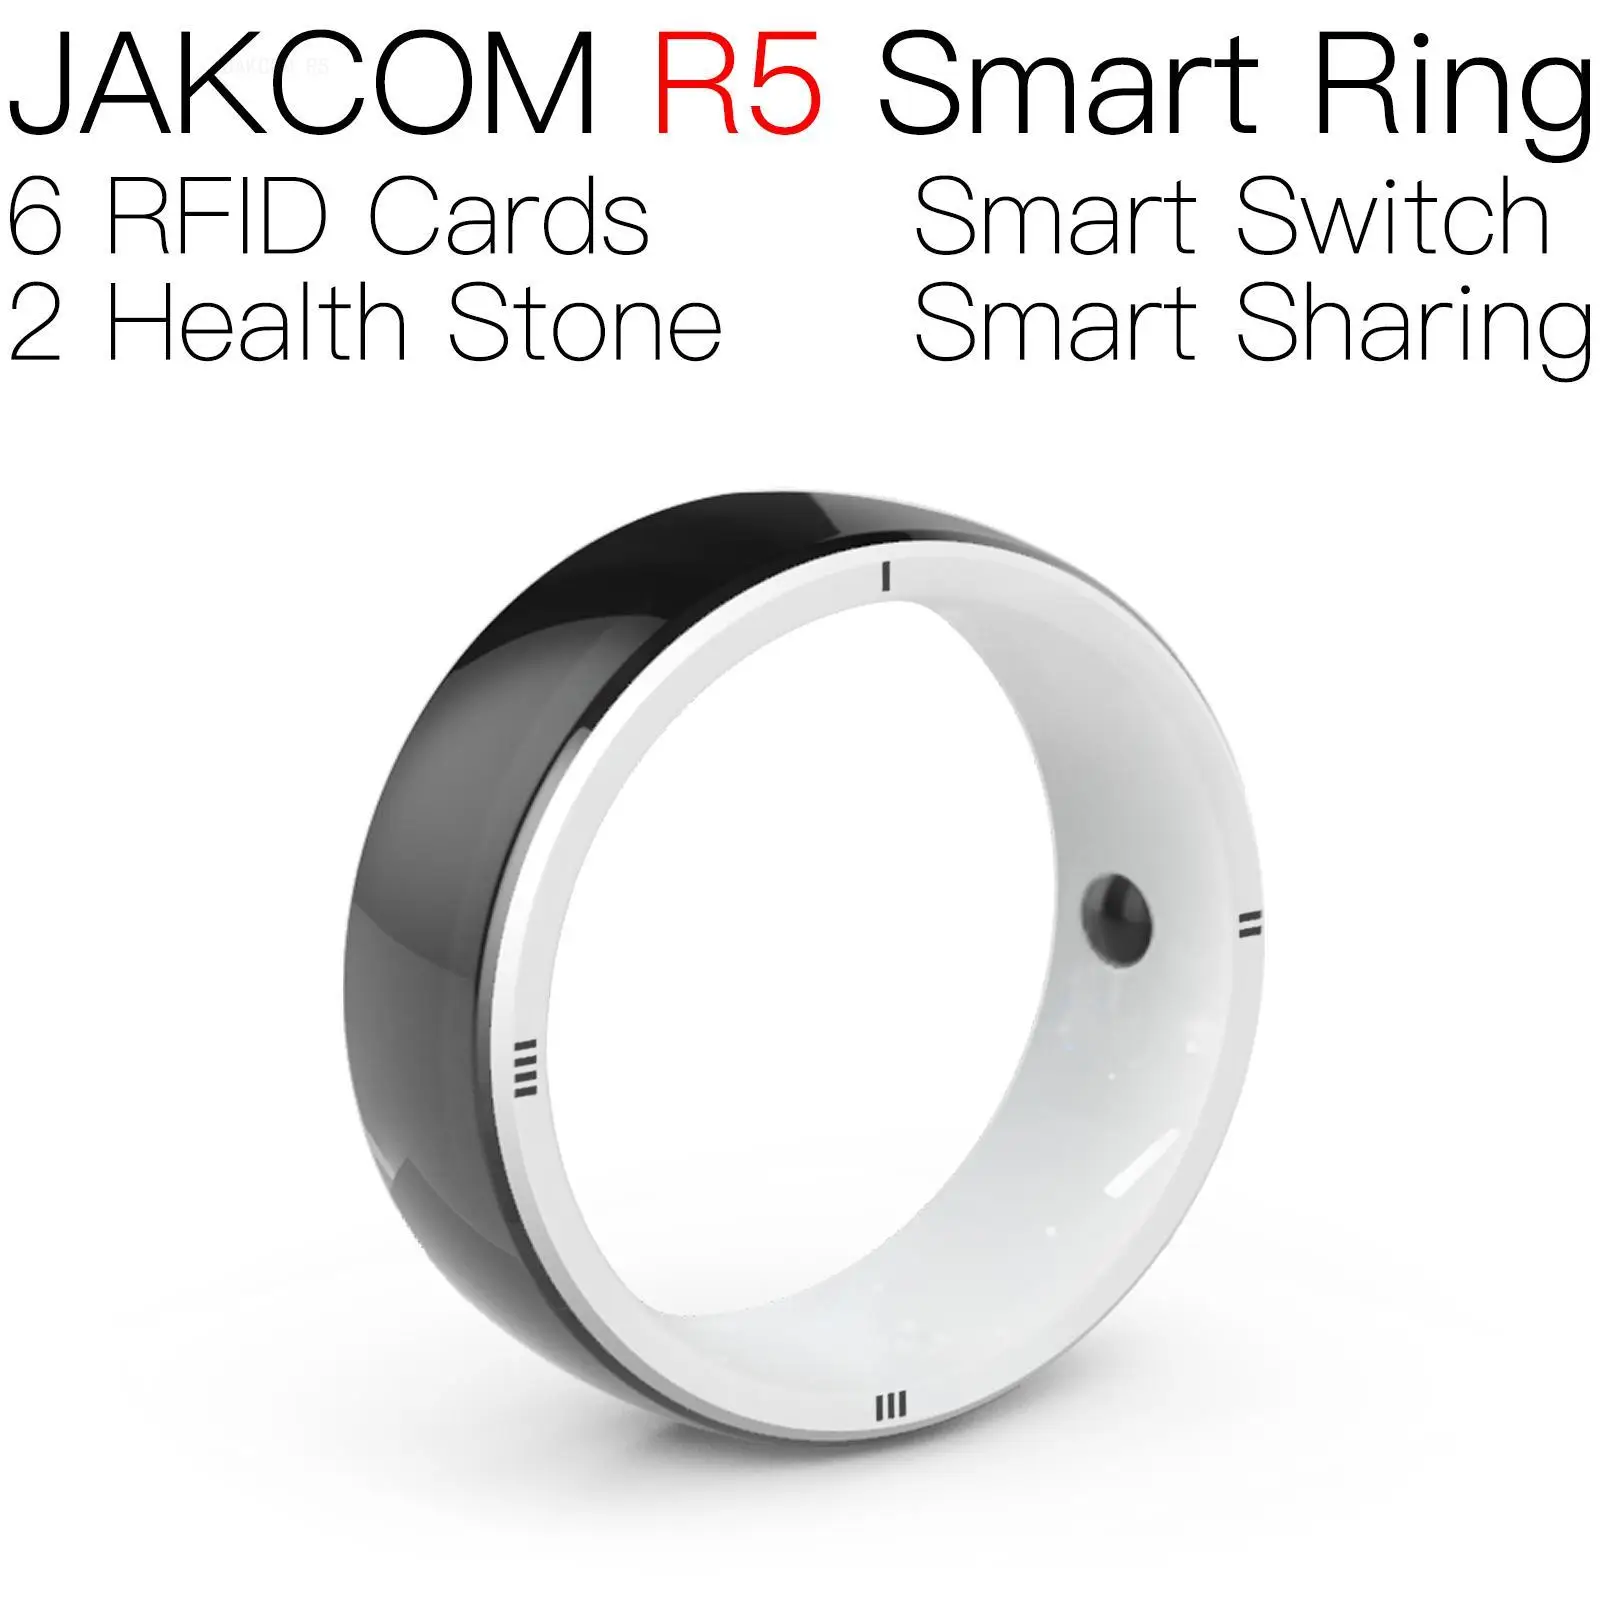 

JAKCOM R5 Smart Ring Match to copy card uid s50 1k мгц nfc tag mhz ntag215 coin hitags rifd writable chip rfid human implant